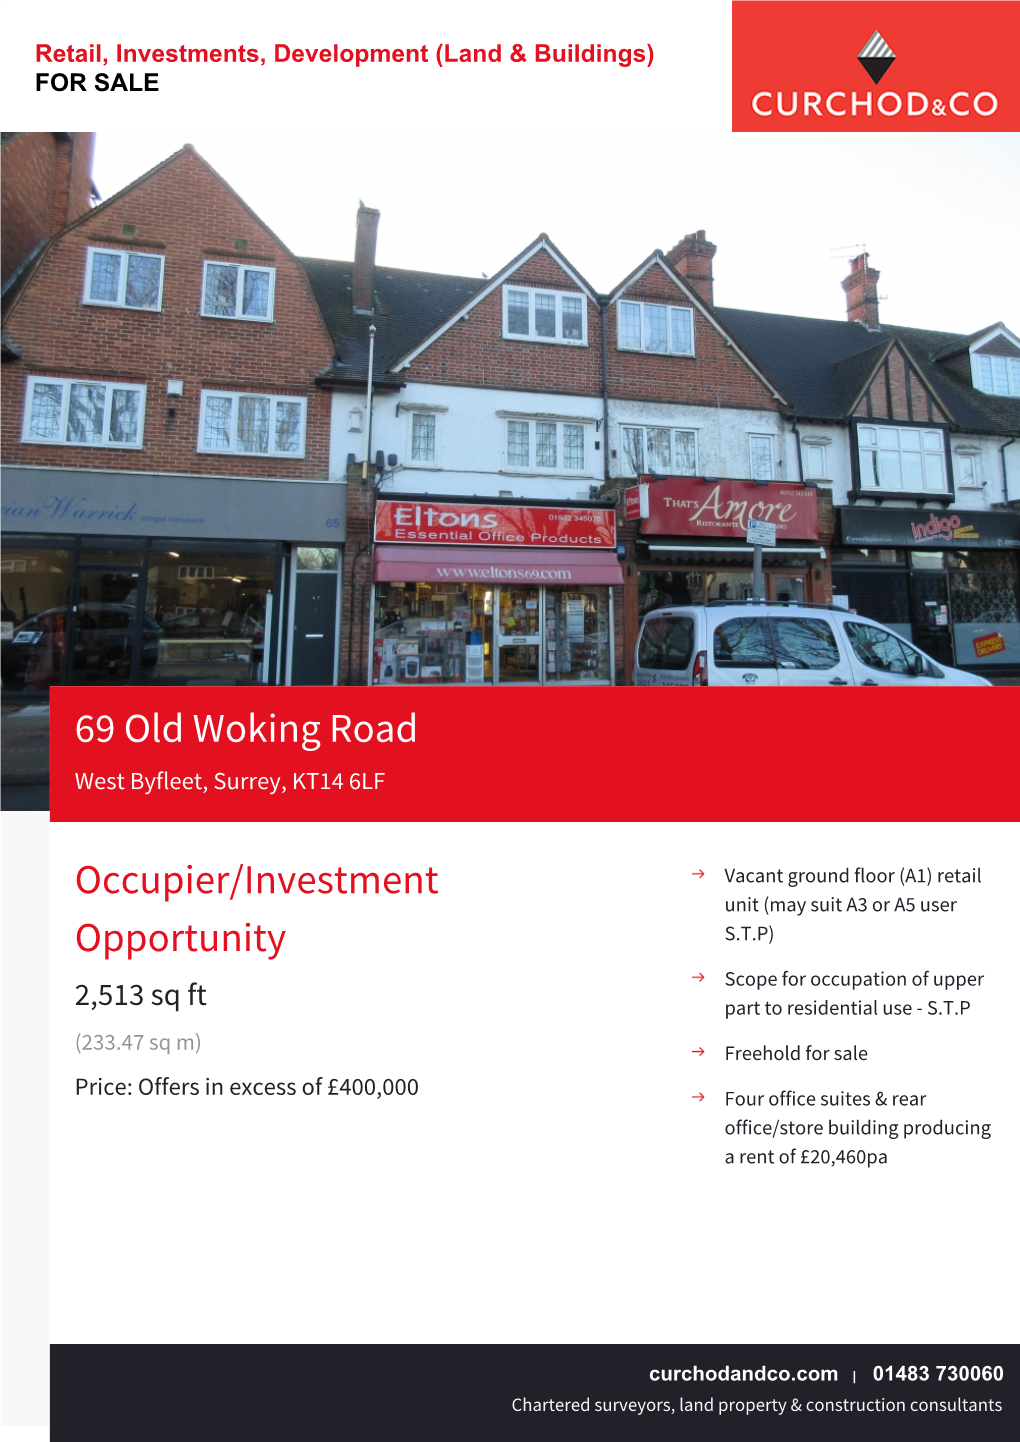 69 Old Woking Road Occupier/Investment Opportunity